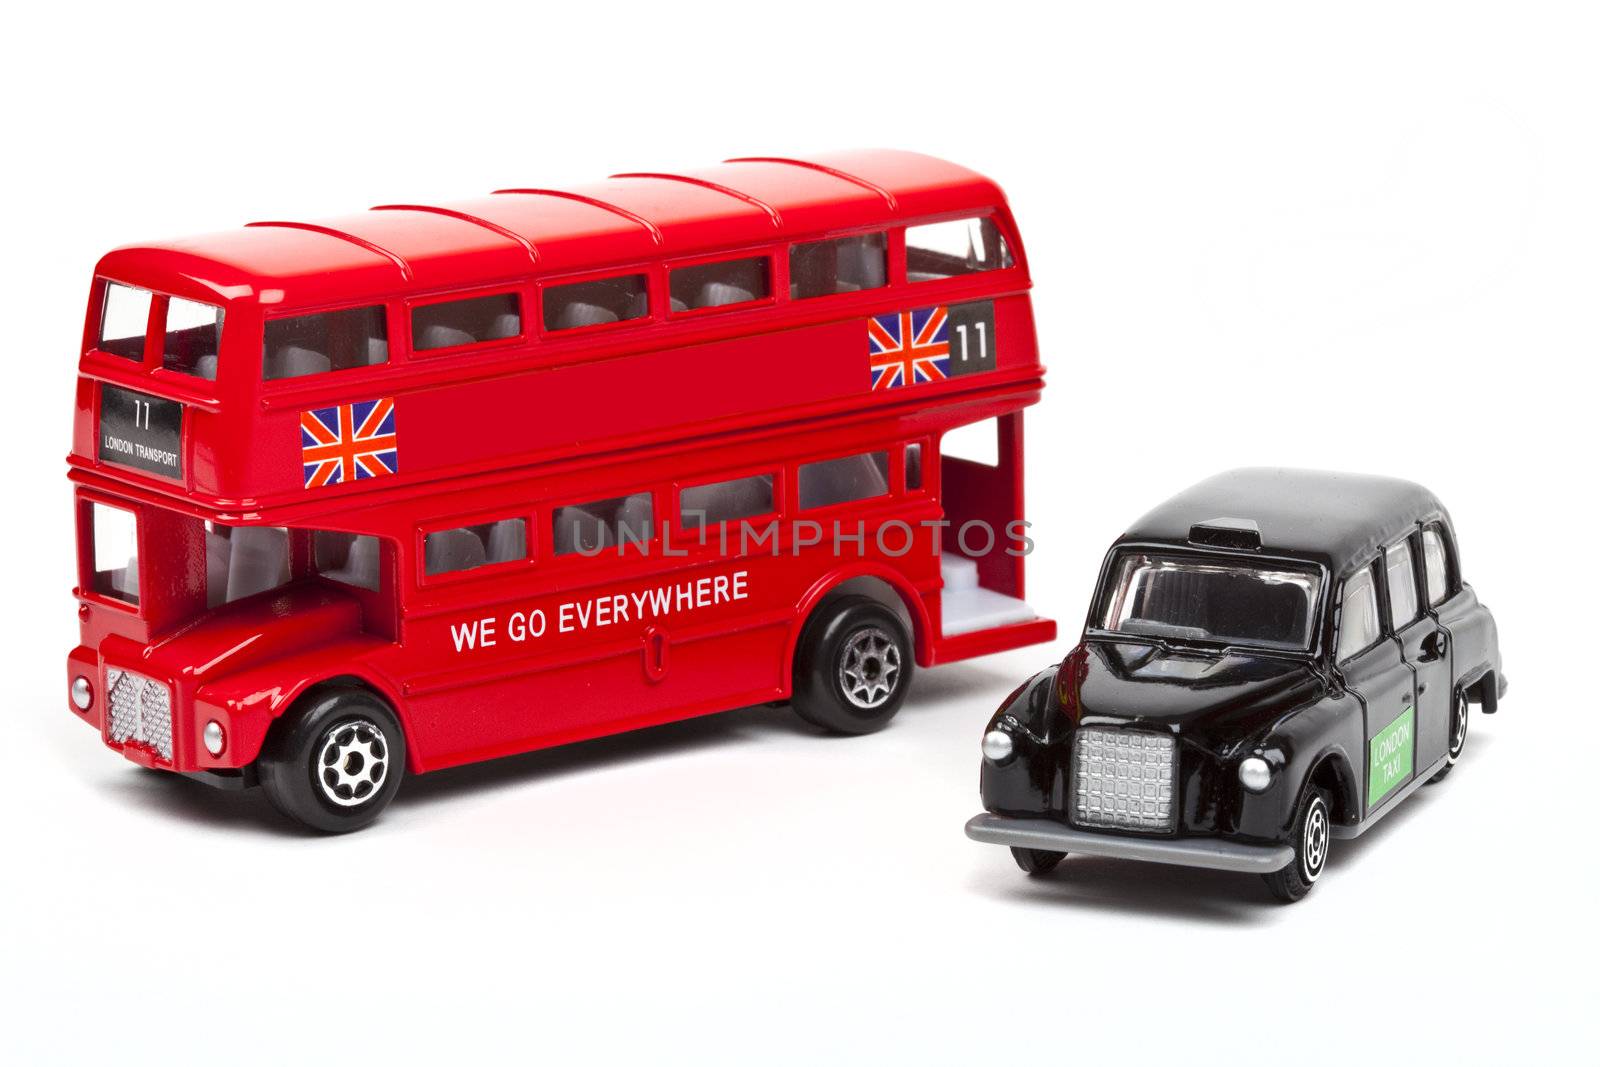 A red London Bus and black London Taxi over a white background.